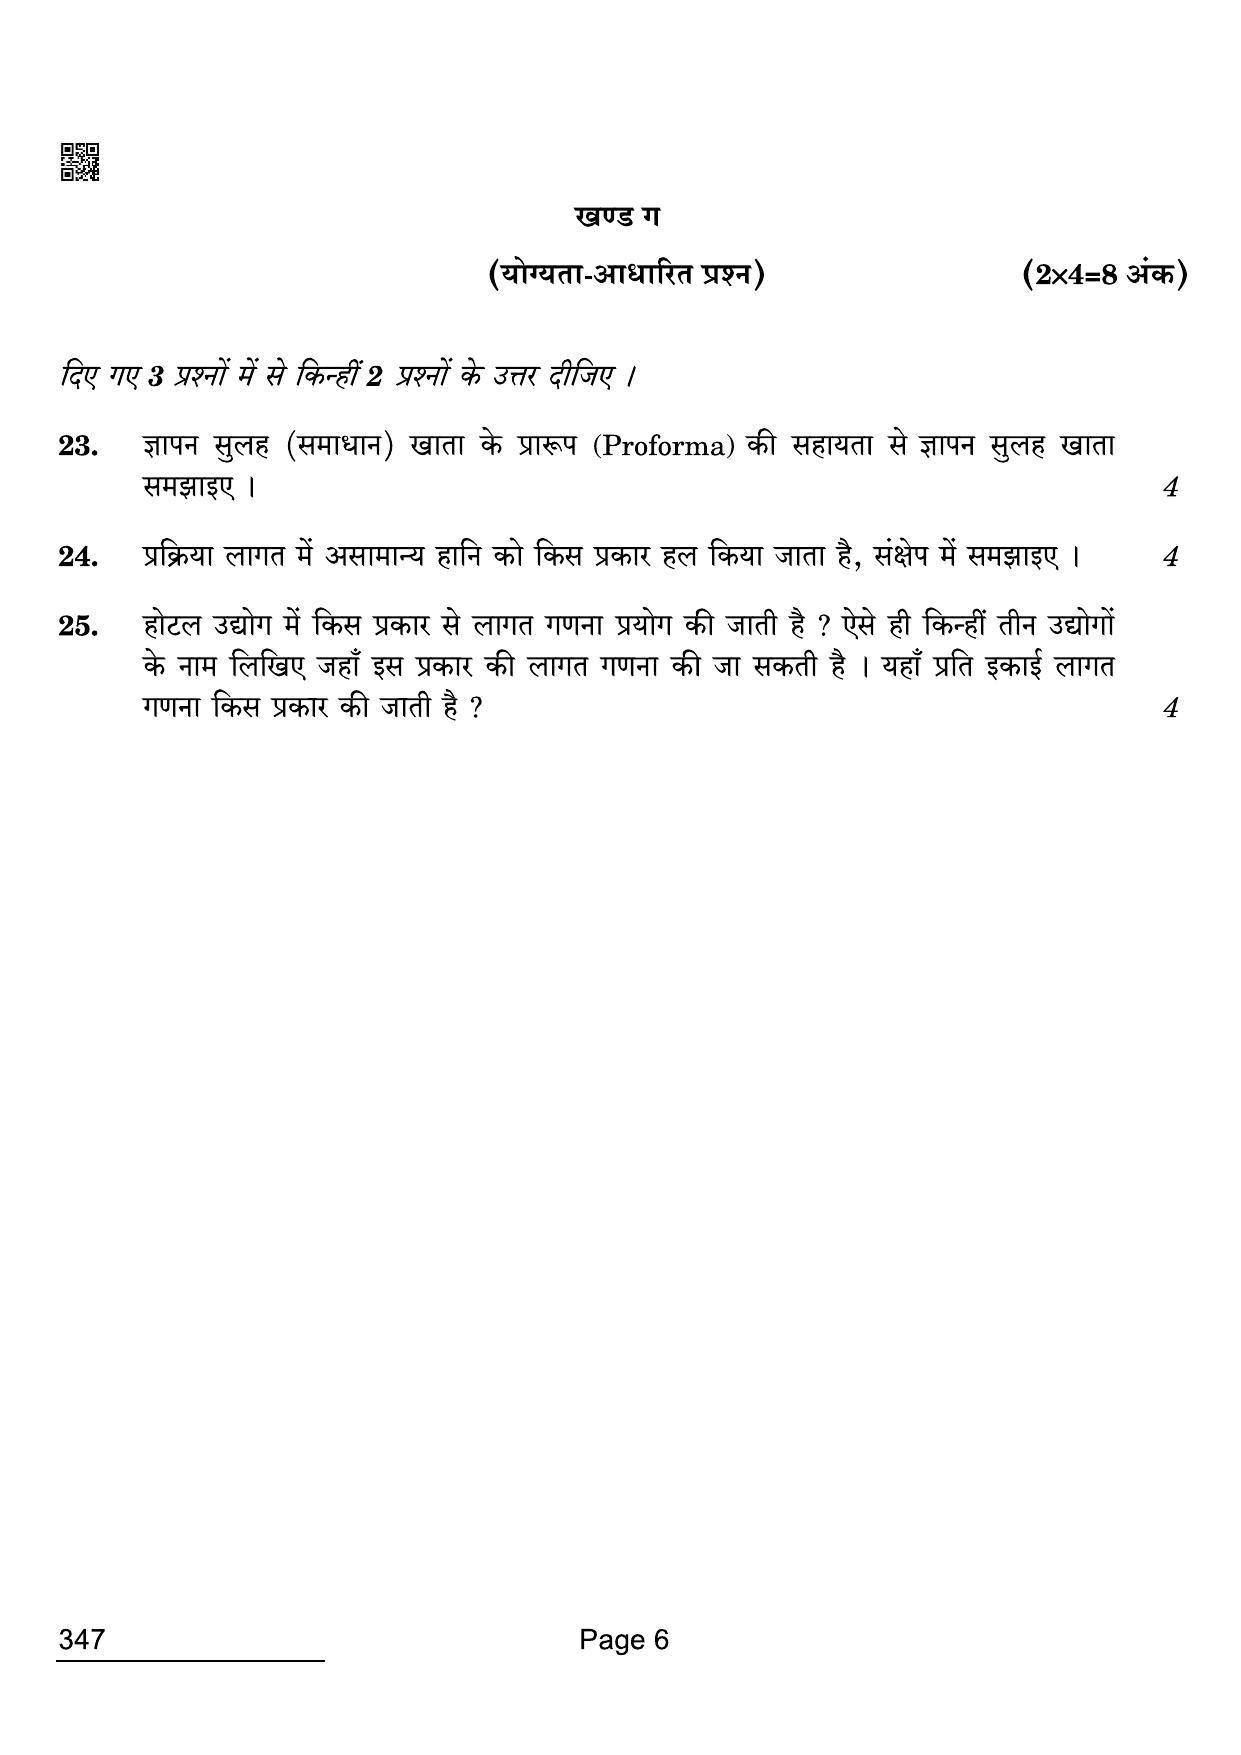 CBSE Class 12 347 Cost Accounting 2022 Compartment Question Paper - Page 6